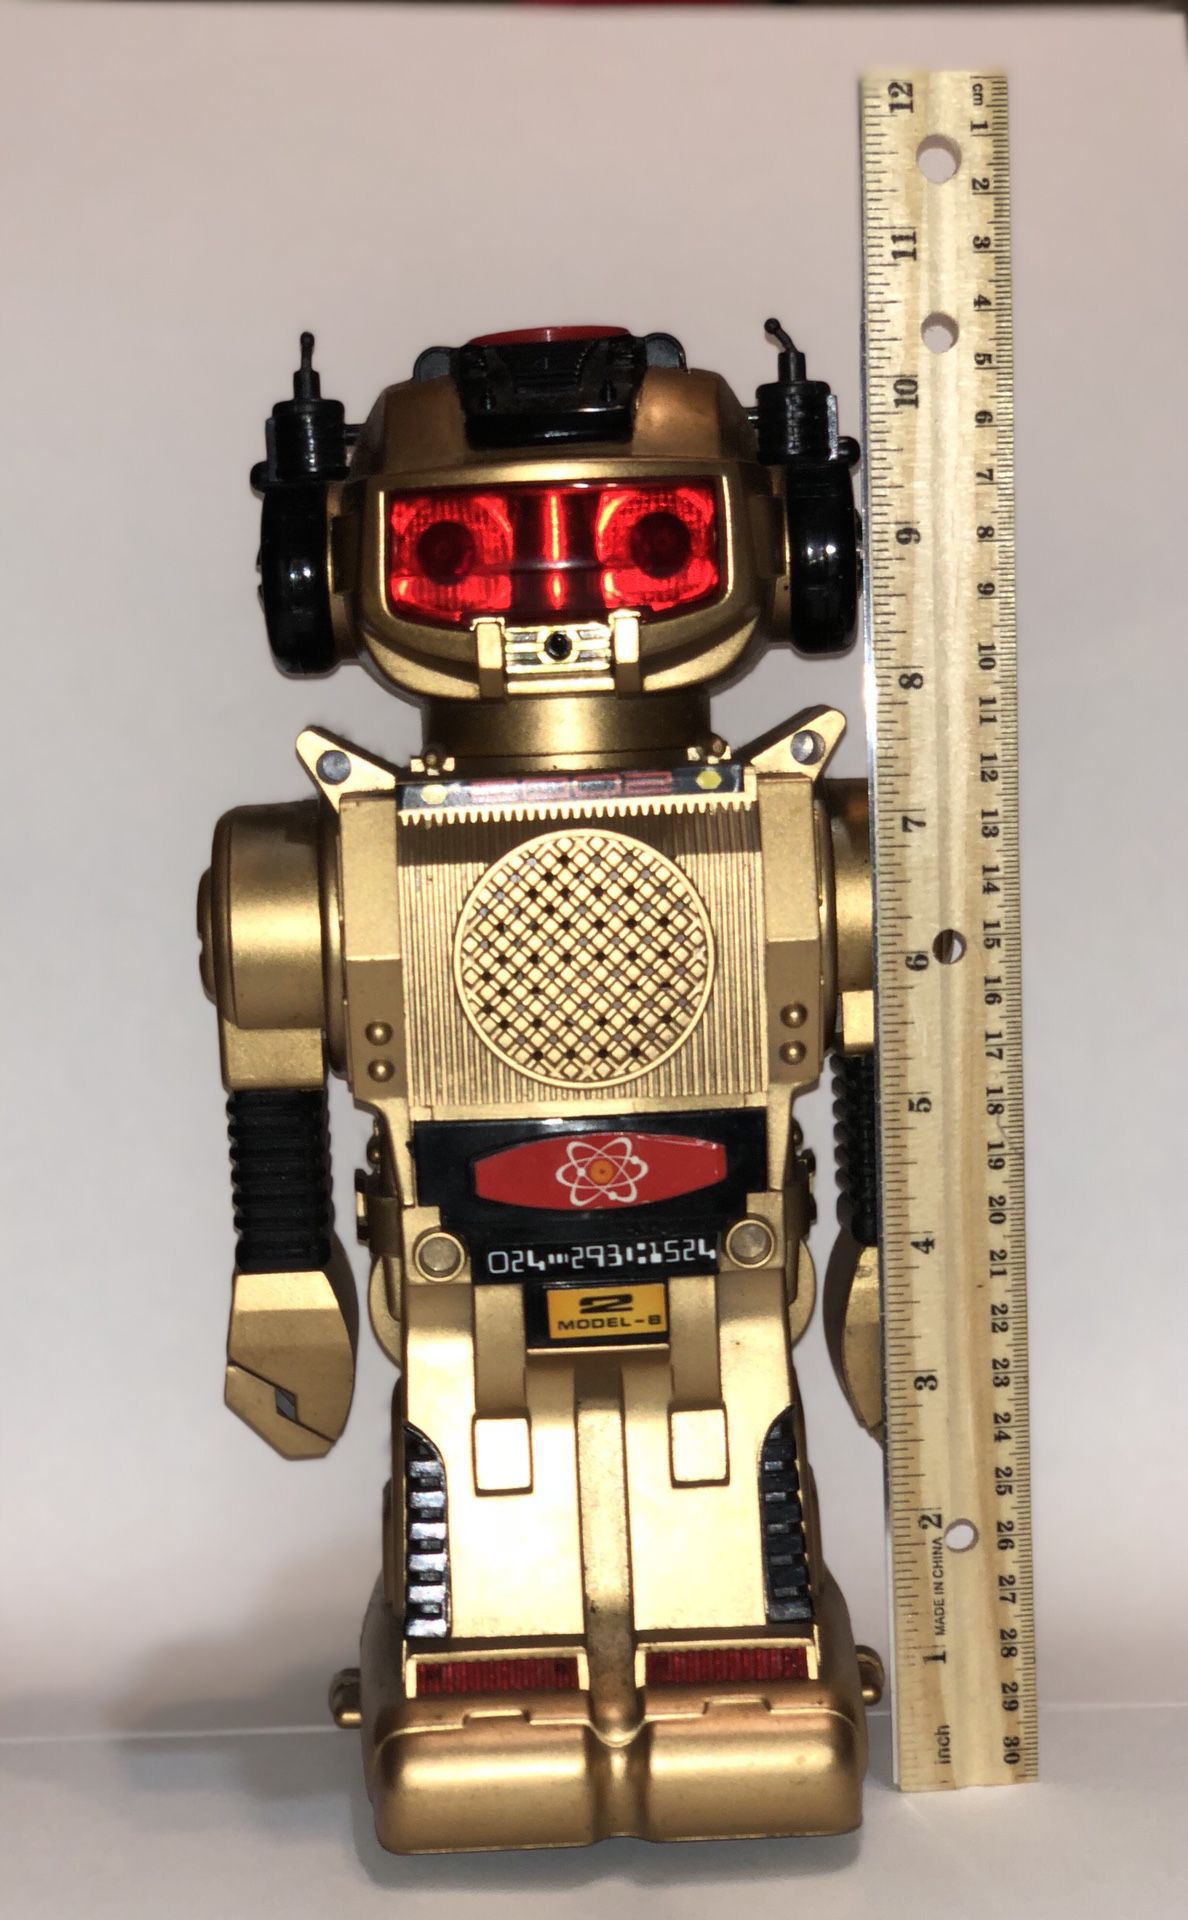 Vintage 80’s Robot Collecter‘s Toy